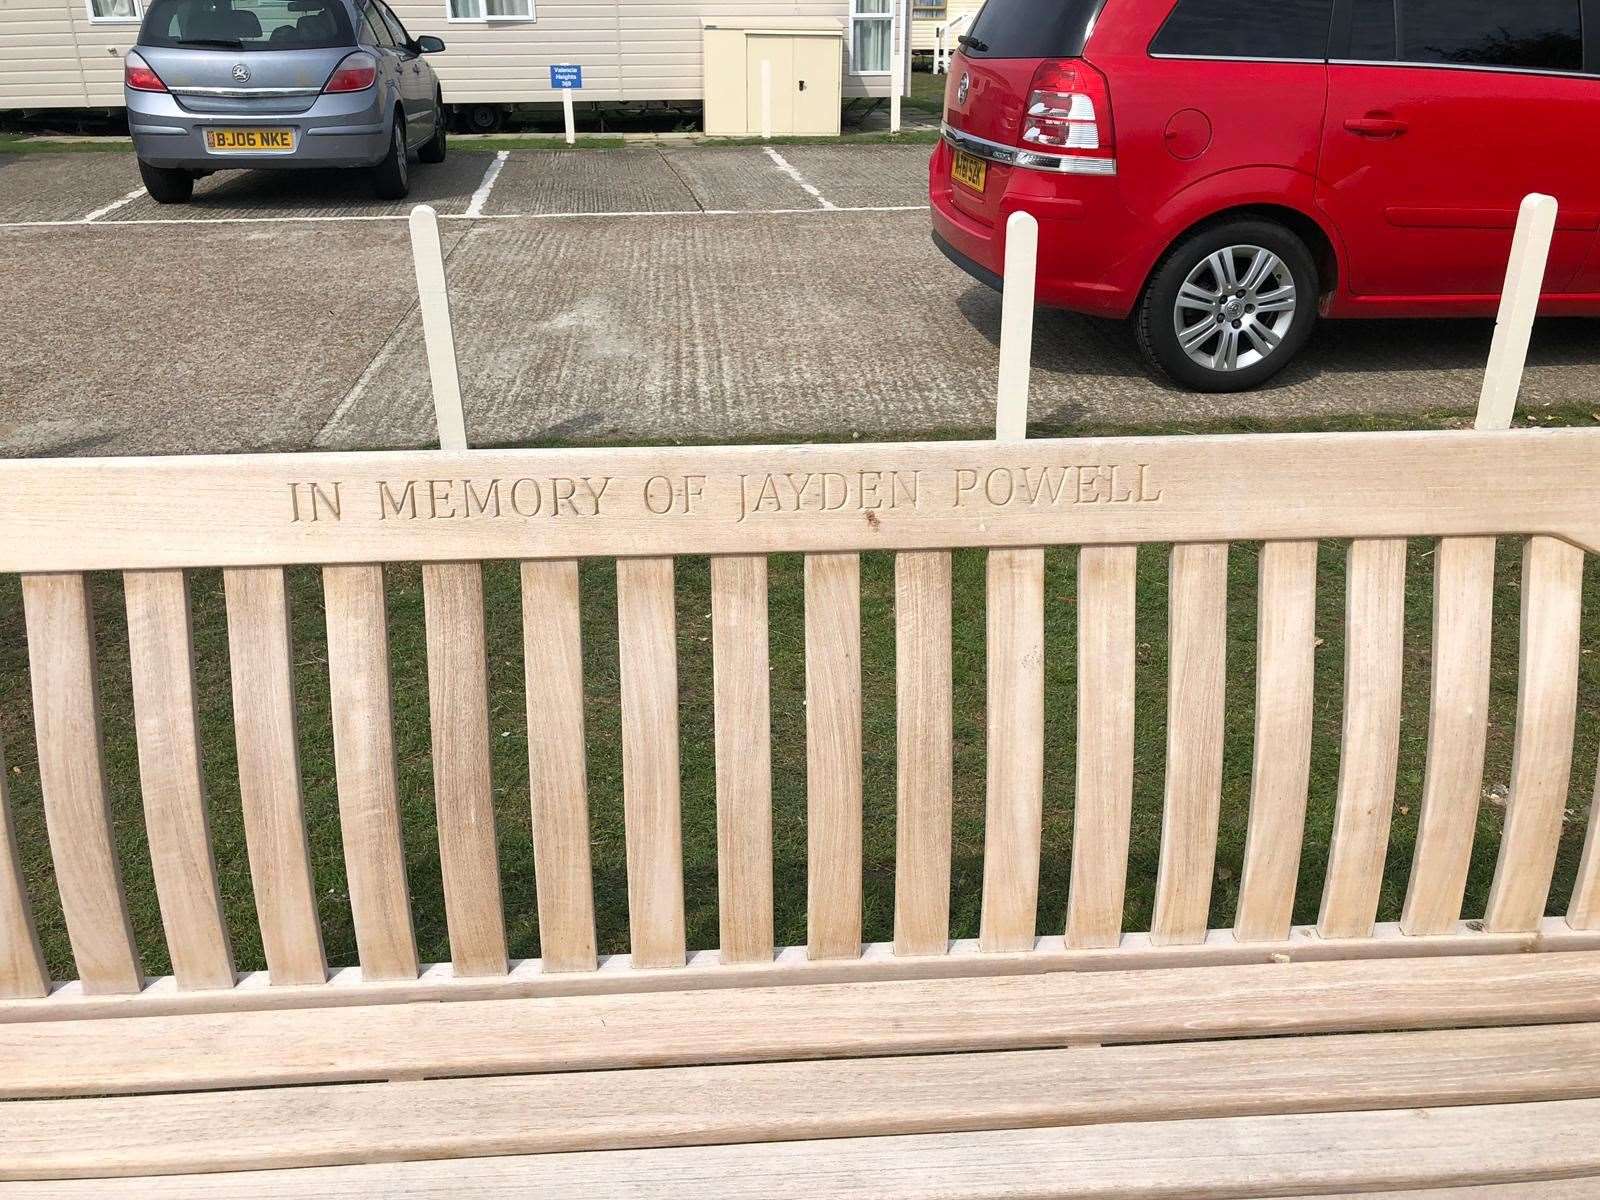 A bench has been installed in Jayden Powell's memory at the Romney Sands holiday park (15012182)